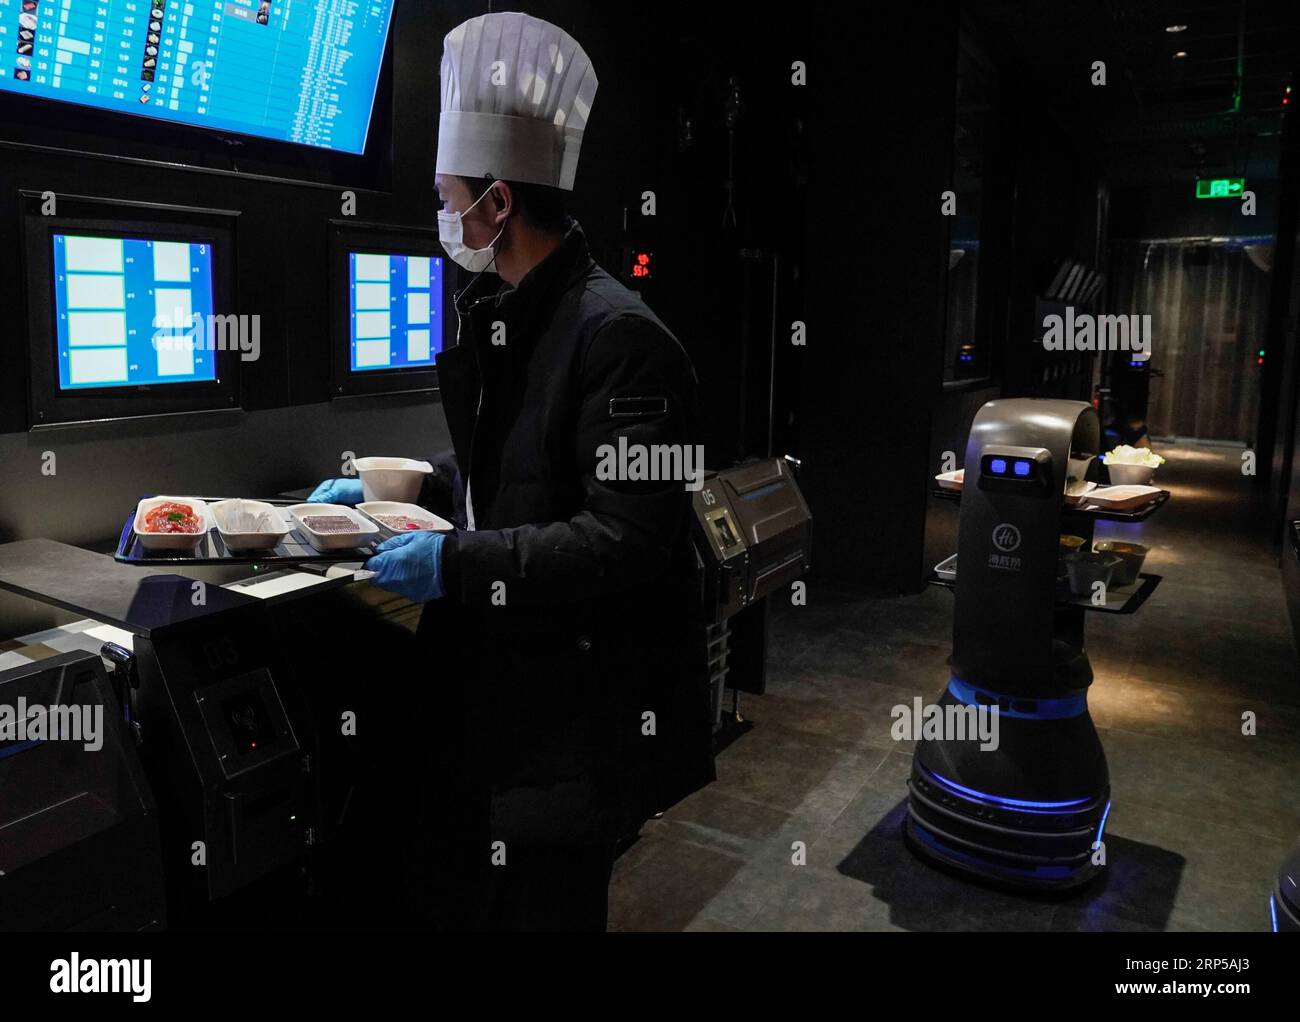 (181206) -- BEIJING, Dec. 6, 2018 -- A delivery robot and a waiter work at the kitchen of a hot pot restaurant in Beijing, capital of China, Dec. 5, 2018. A hot pot restaurant which integrates artificial intelligence, big data management and smart robot service has attracted lots of consumers. After customers order their dishes with a tablet computer, robotic arms in the kitchen get all dishes ready and then the delivery robots sent the dishes to the tables. Workers in the kitchen control all the procedures and also monitor the data for better management. ) (zwx) CHINA-BEIJING-AI RESTAURANT (C Stock Photo